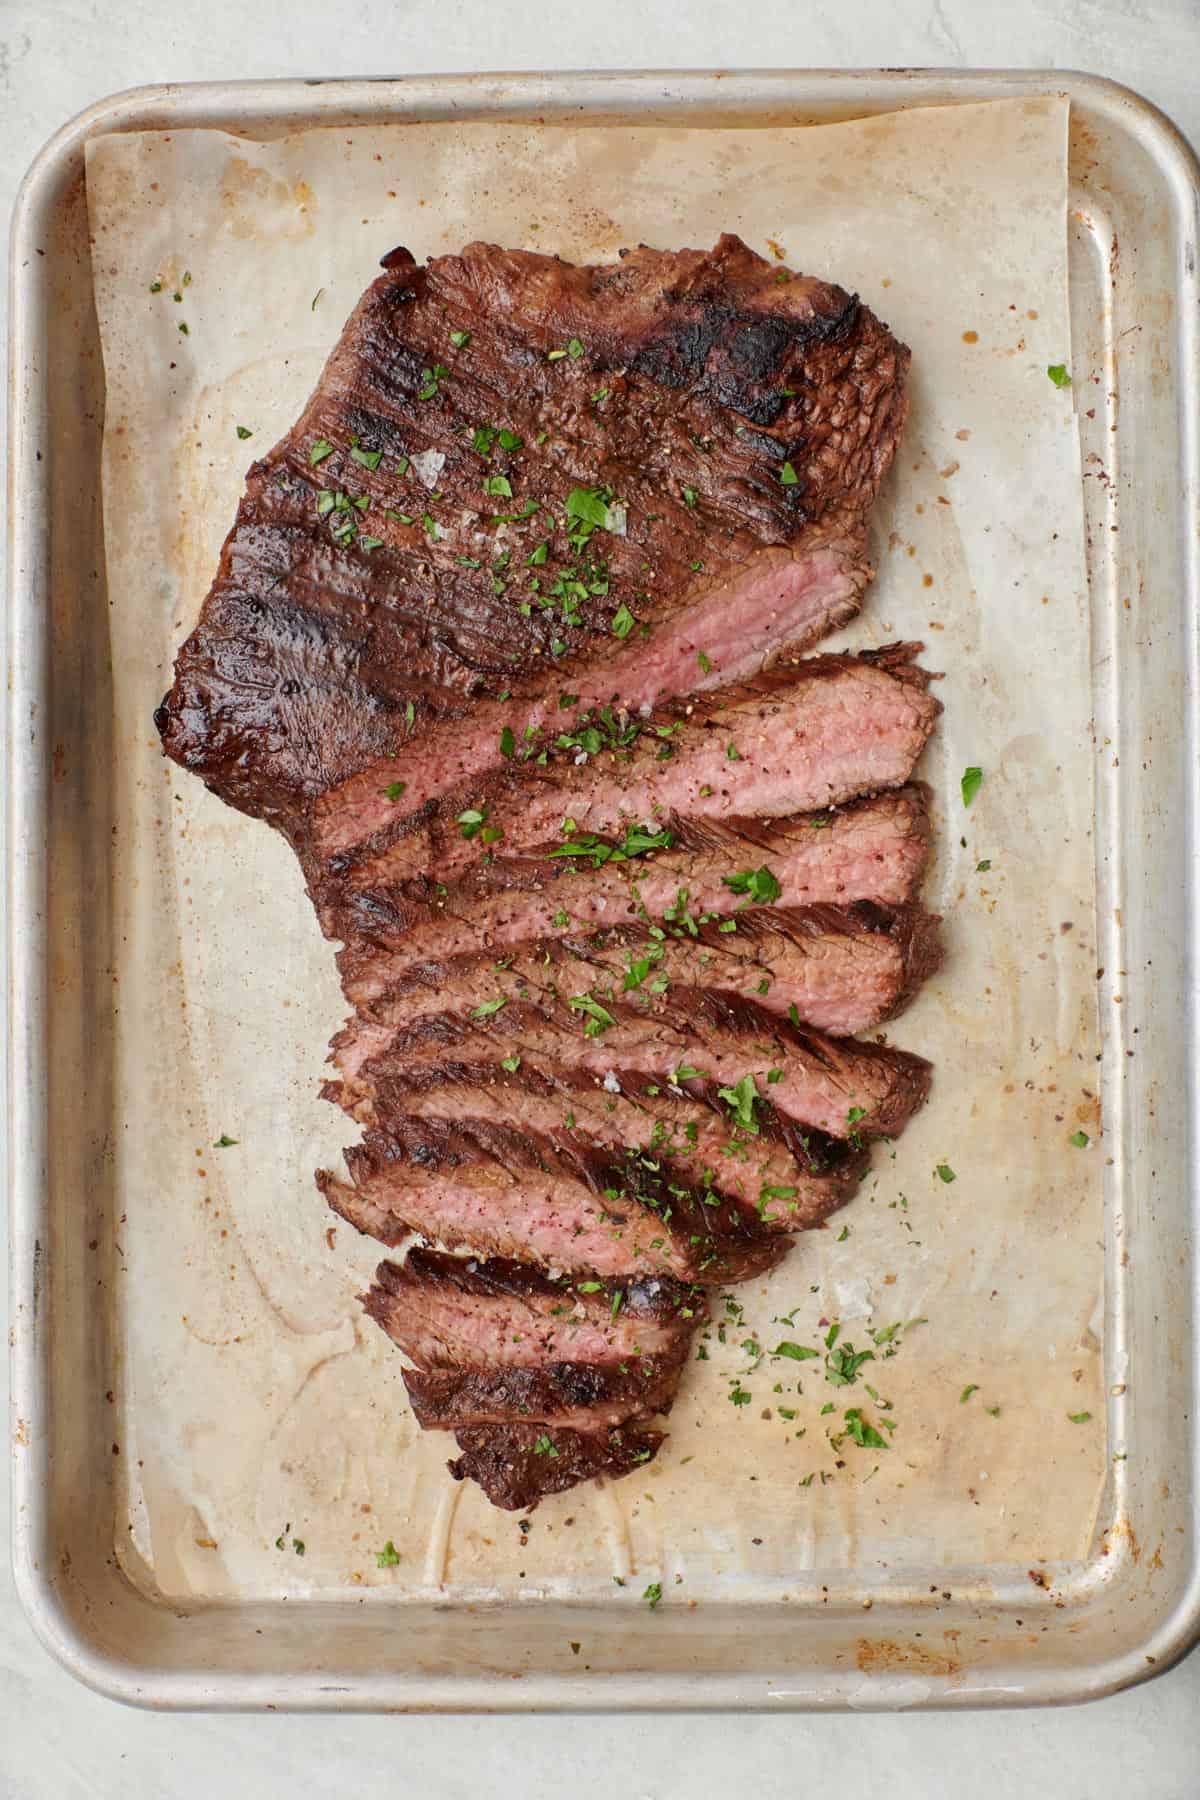 Flank steak on a parchment-lined sheet pan after cooking in the oven, partially sliced and cooked to to rare.